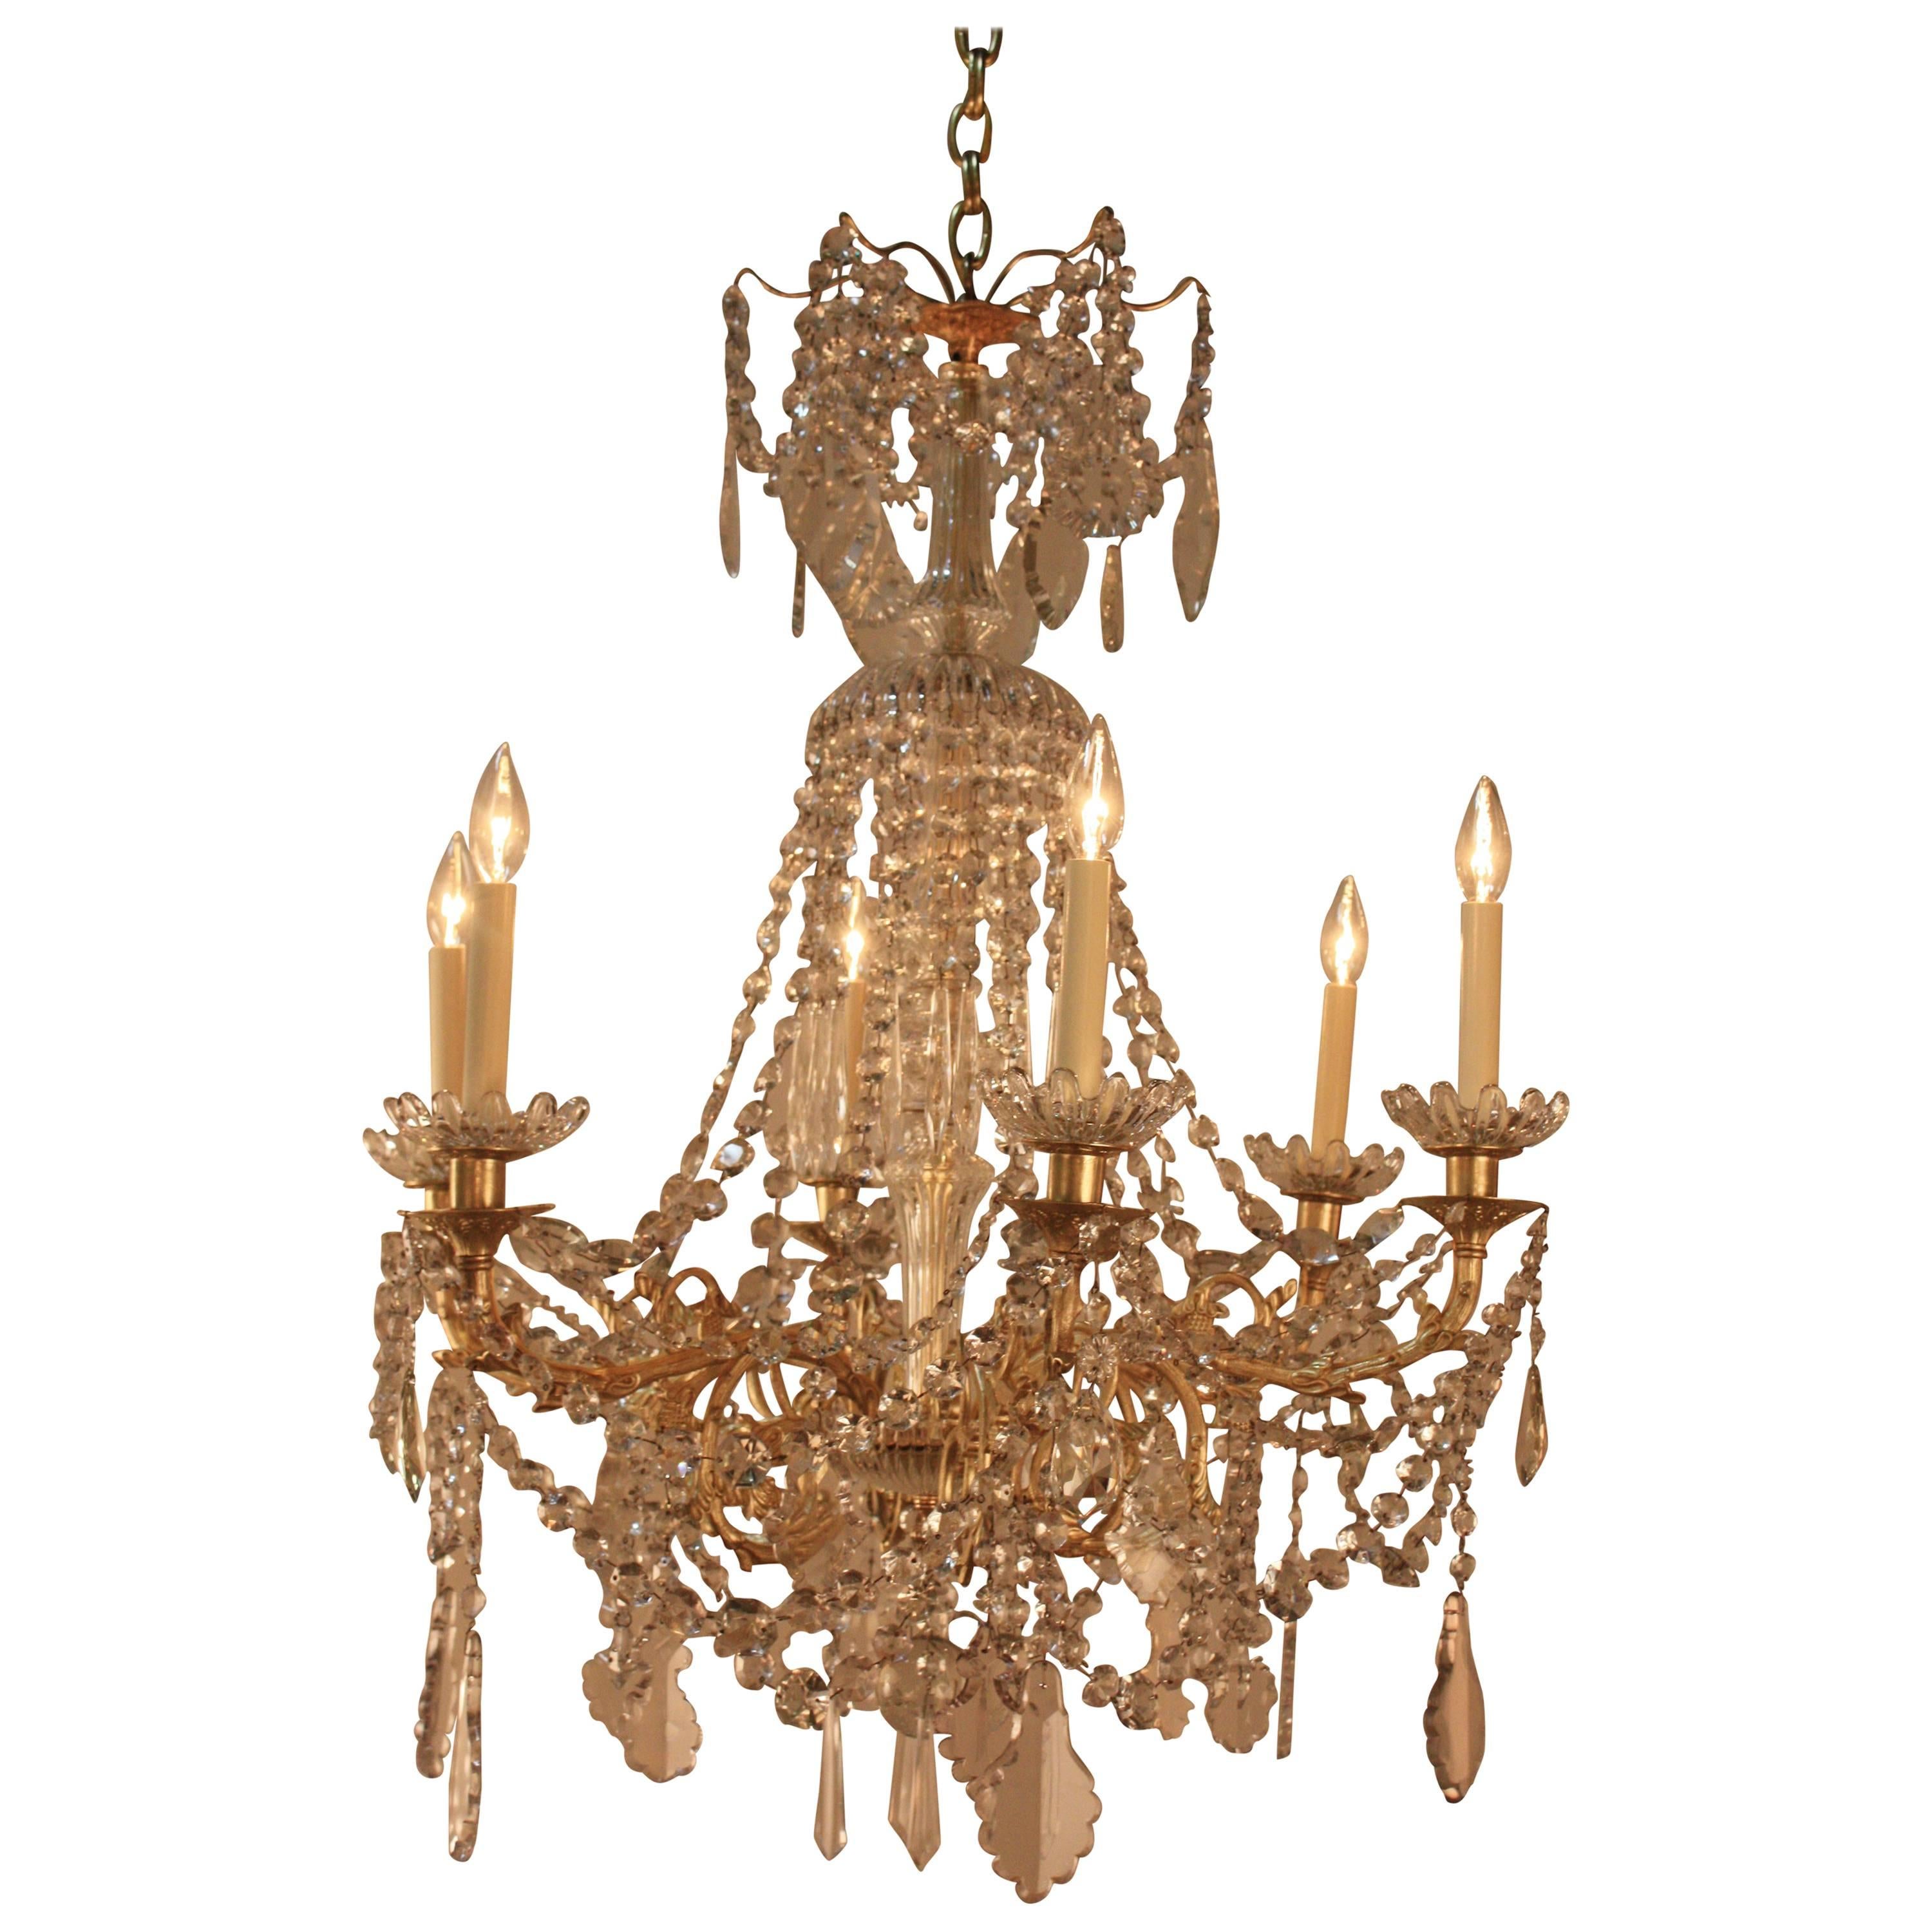 French 19th Century Baccarat Crystal Chandelier